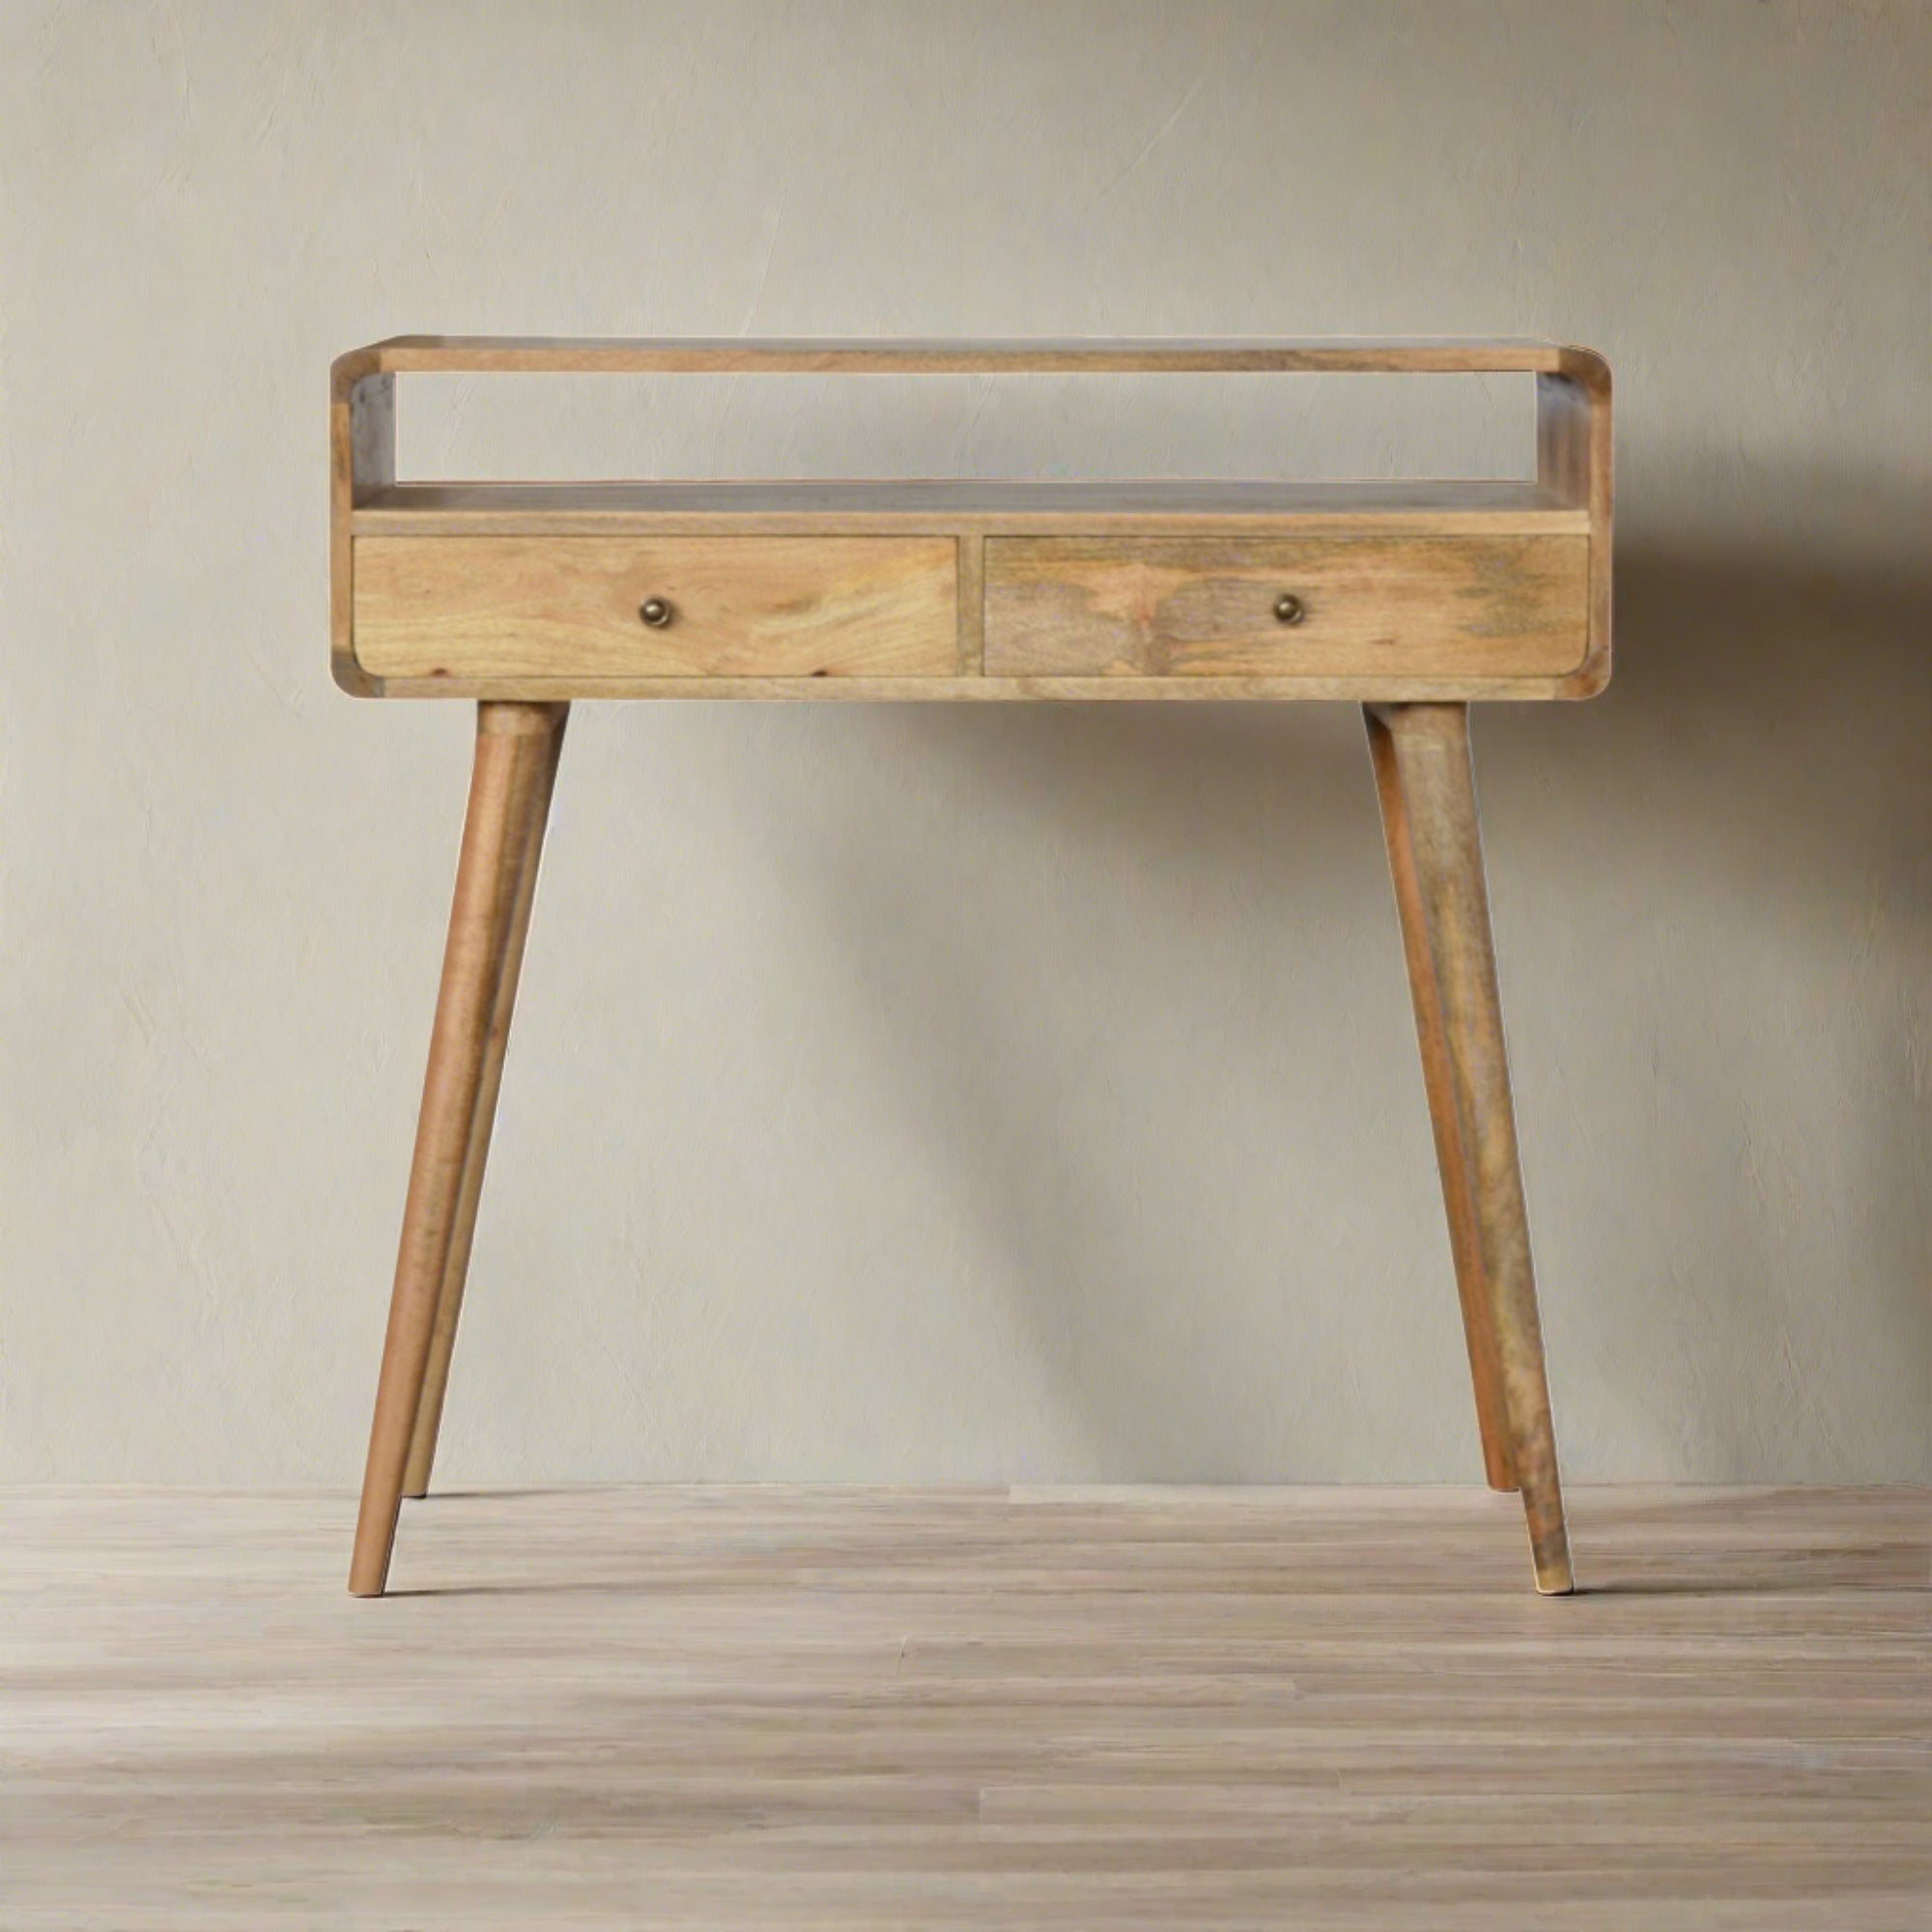 Modal handmade solid wood console table with drawers and open storage shelf in oak-ish finish | malletandplane.com